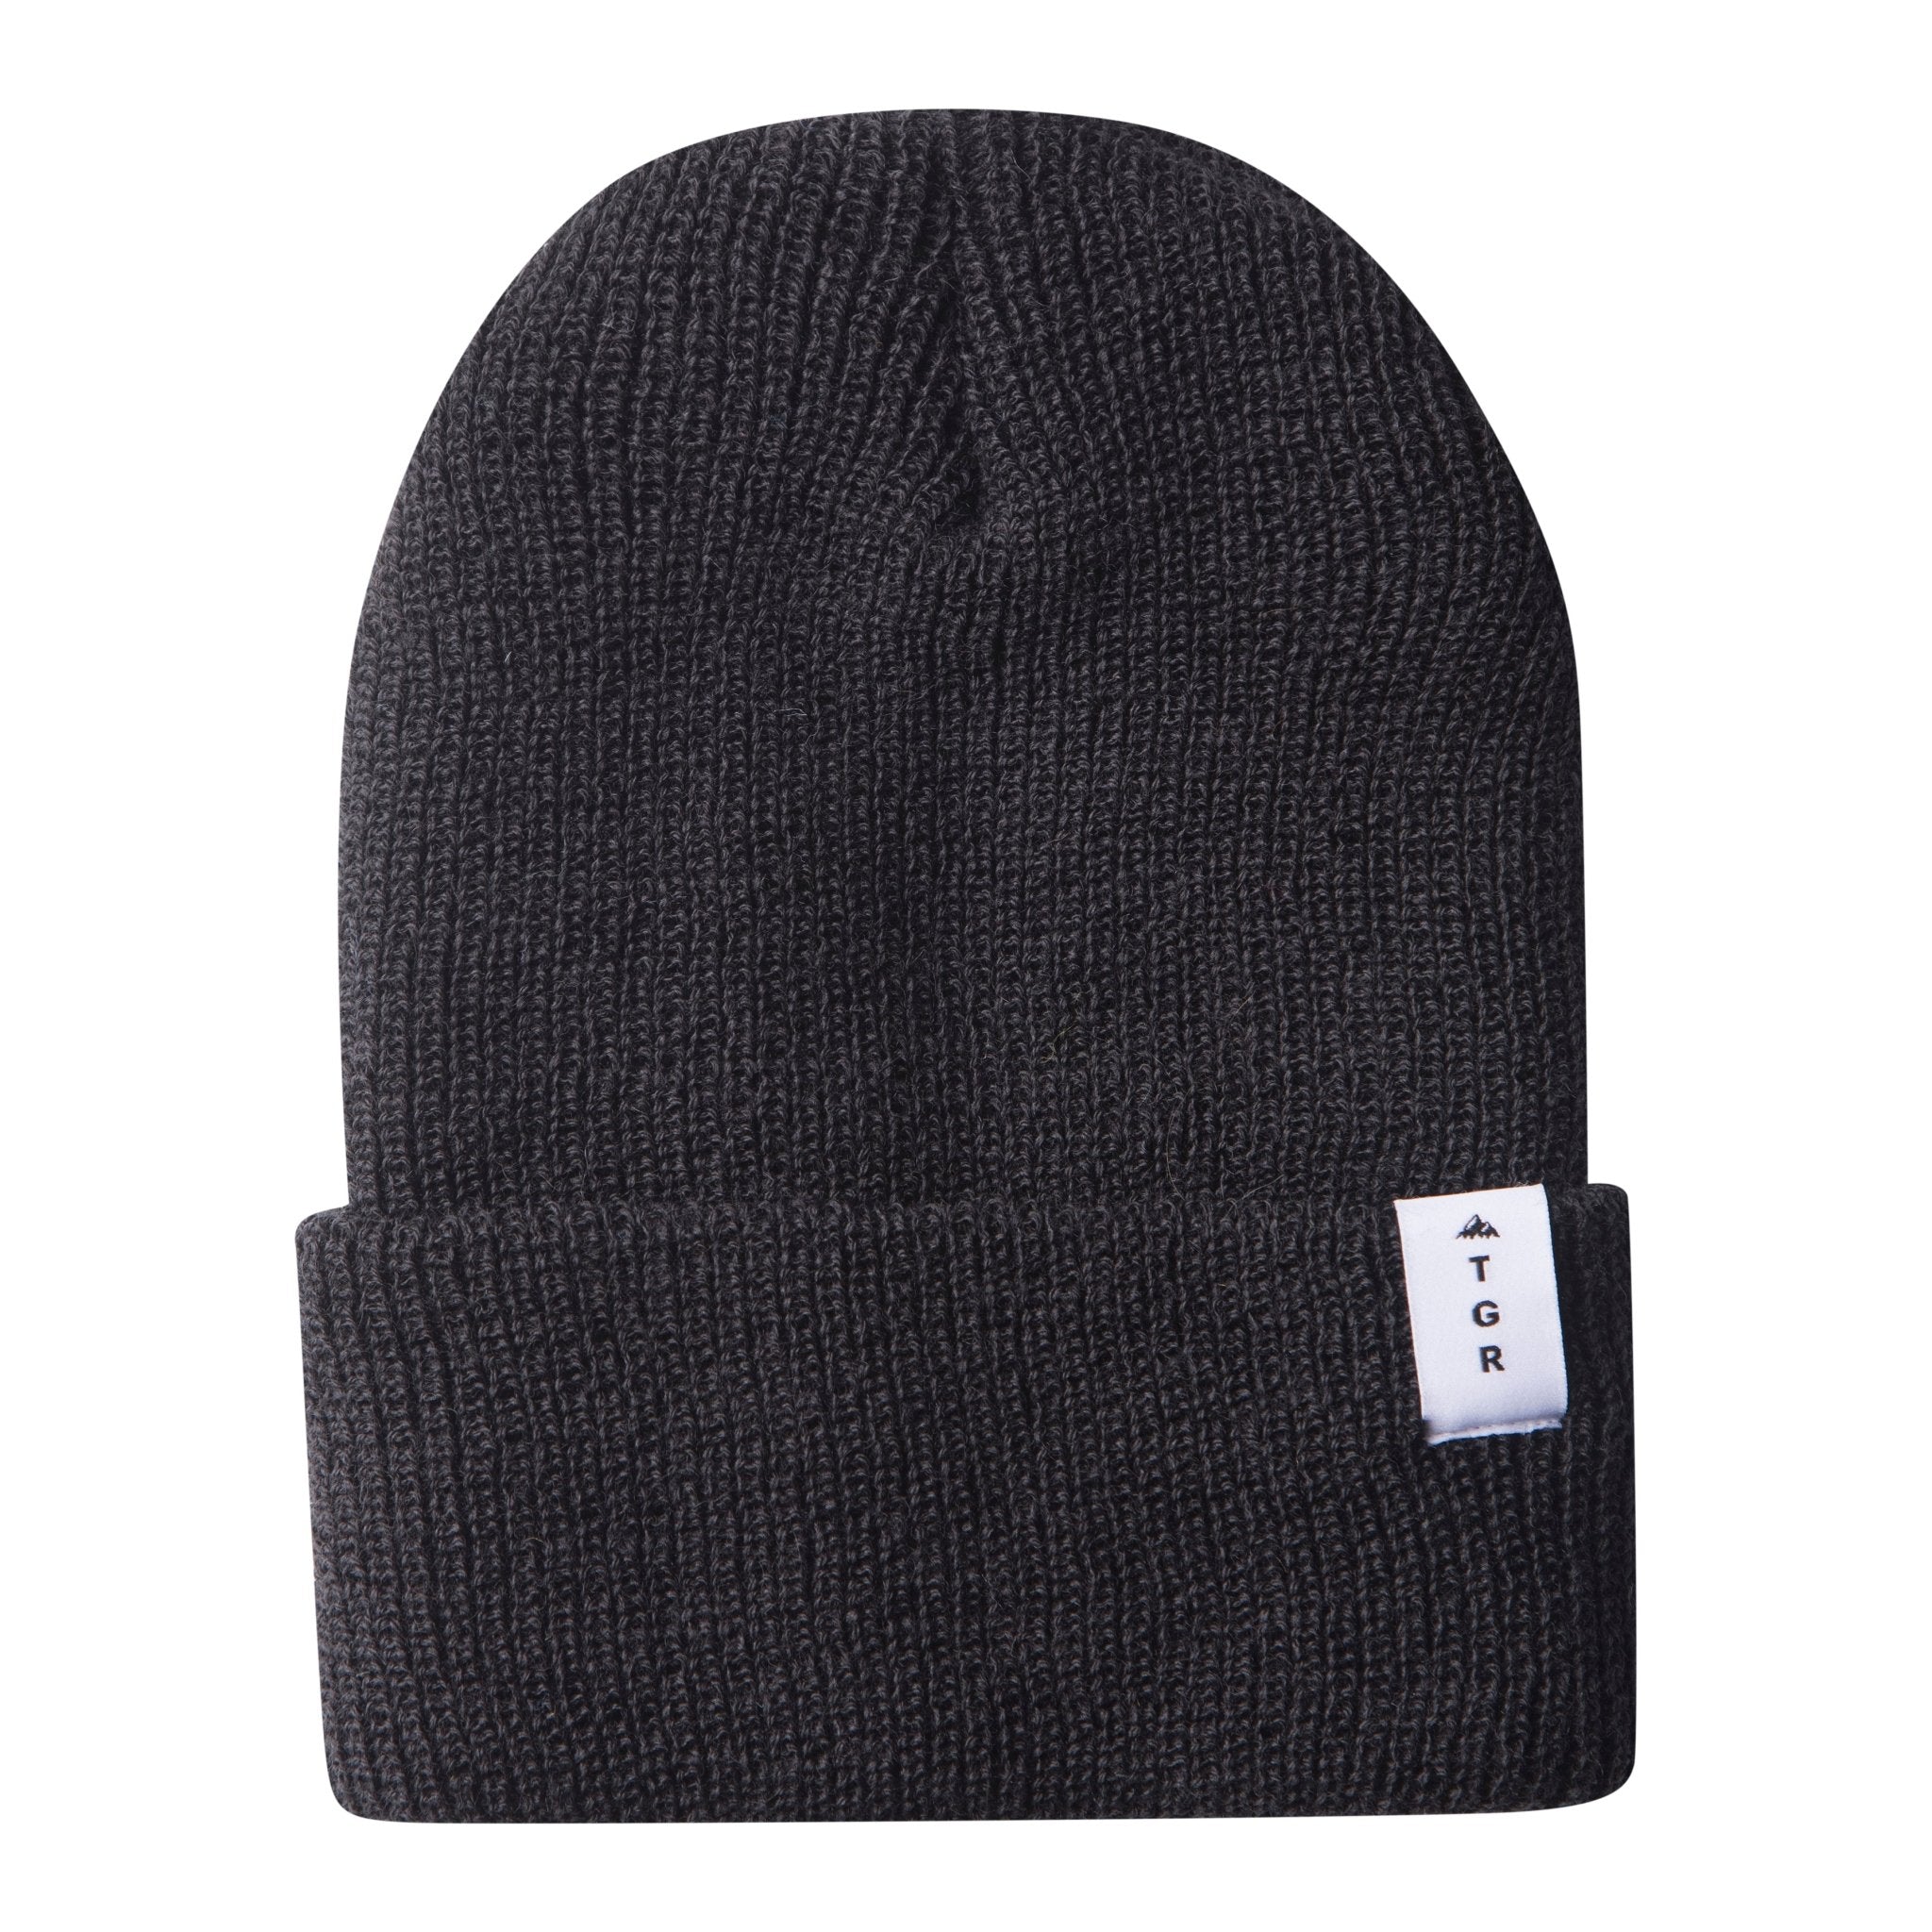 Wool Military Beanie - Made in USA - Teton Gravity Research